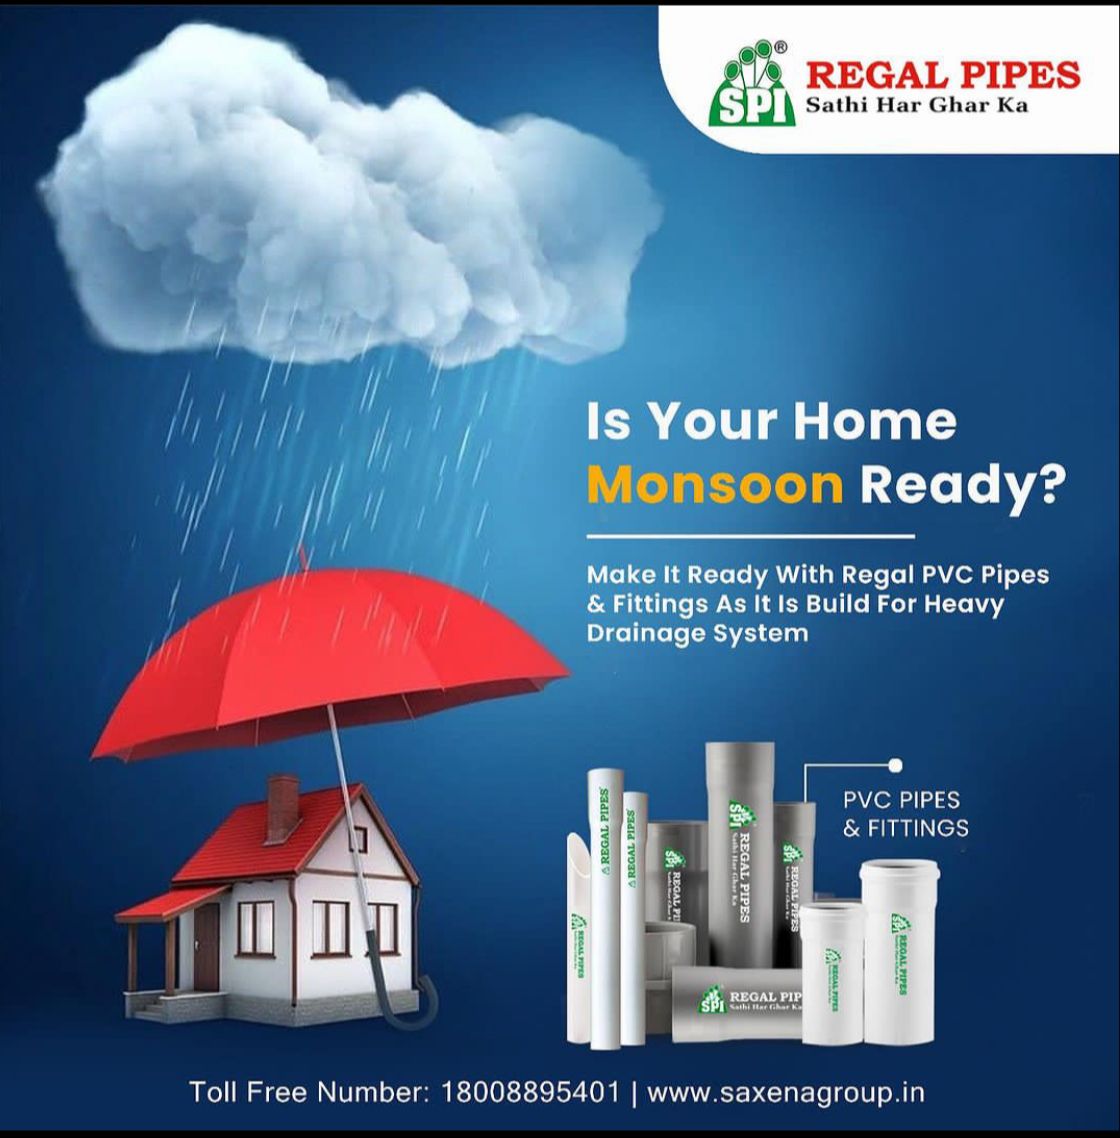 Protect Your Home From Water Leakage  | Saxena Plastic Industries  | LONGLASTING PIPES  , PVC BEST PIPES IN CHANDIGARH , PVC CONDUIT PIPES , PVC PRESSURE PIPES , PVC PIPES IN HOSHIARPUR , PIPES IN KURALI - GL116151